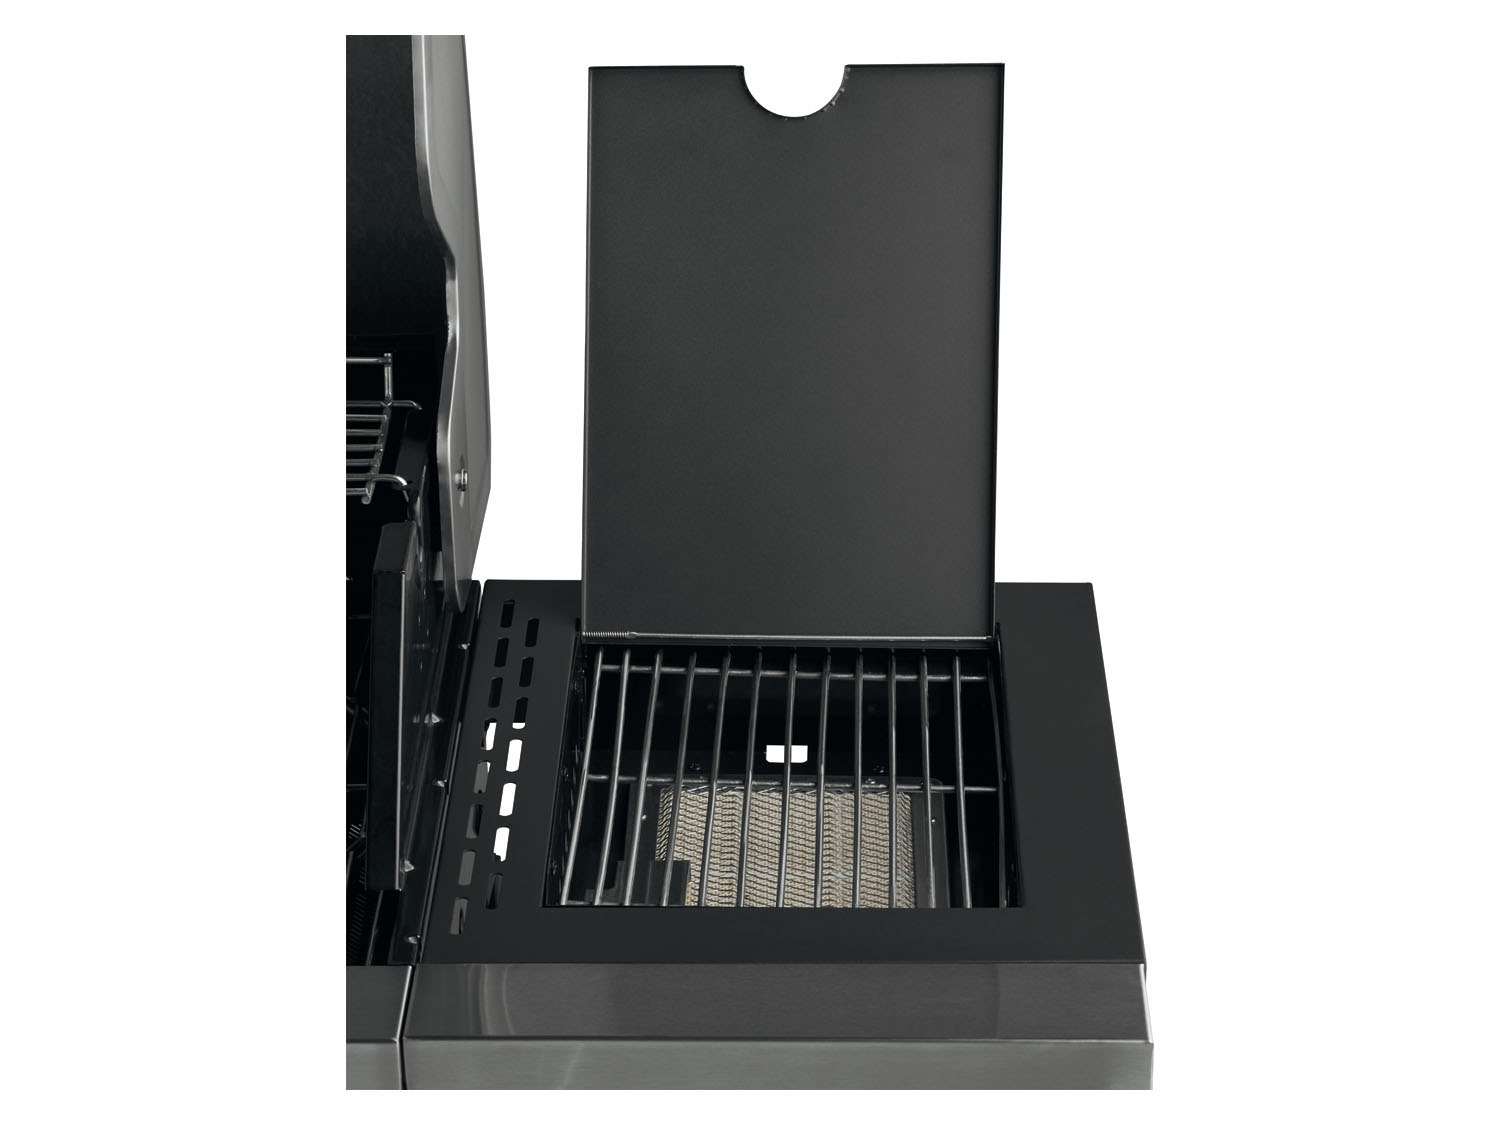 GRILLMEISTER Gasgrill, 4plus1 Brenner, kW 19,7 LIDL 